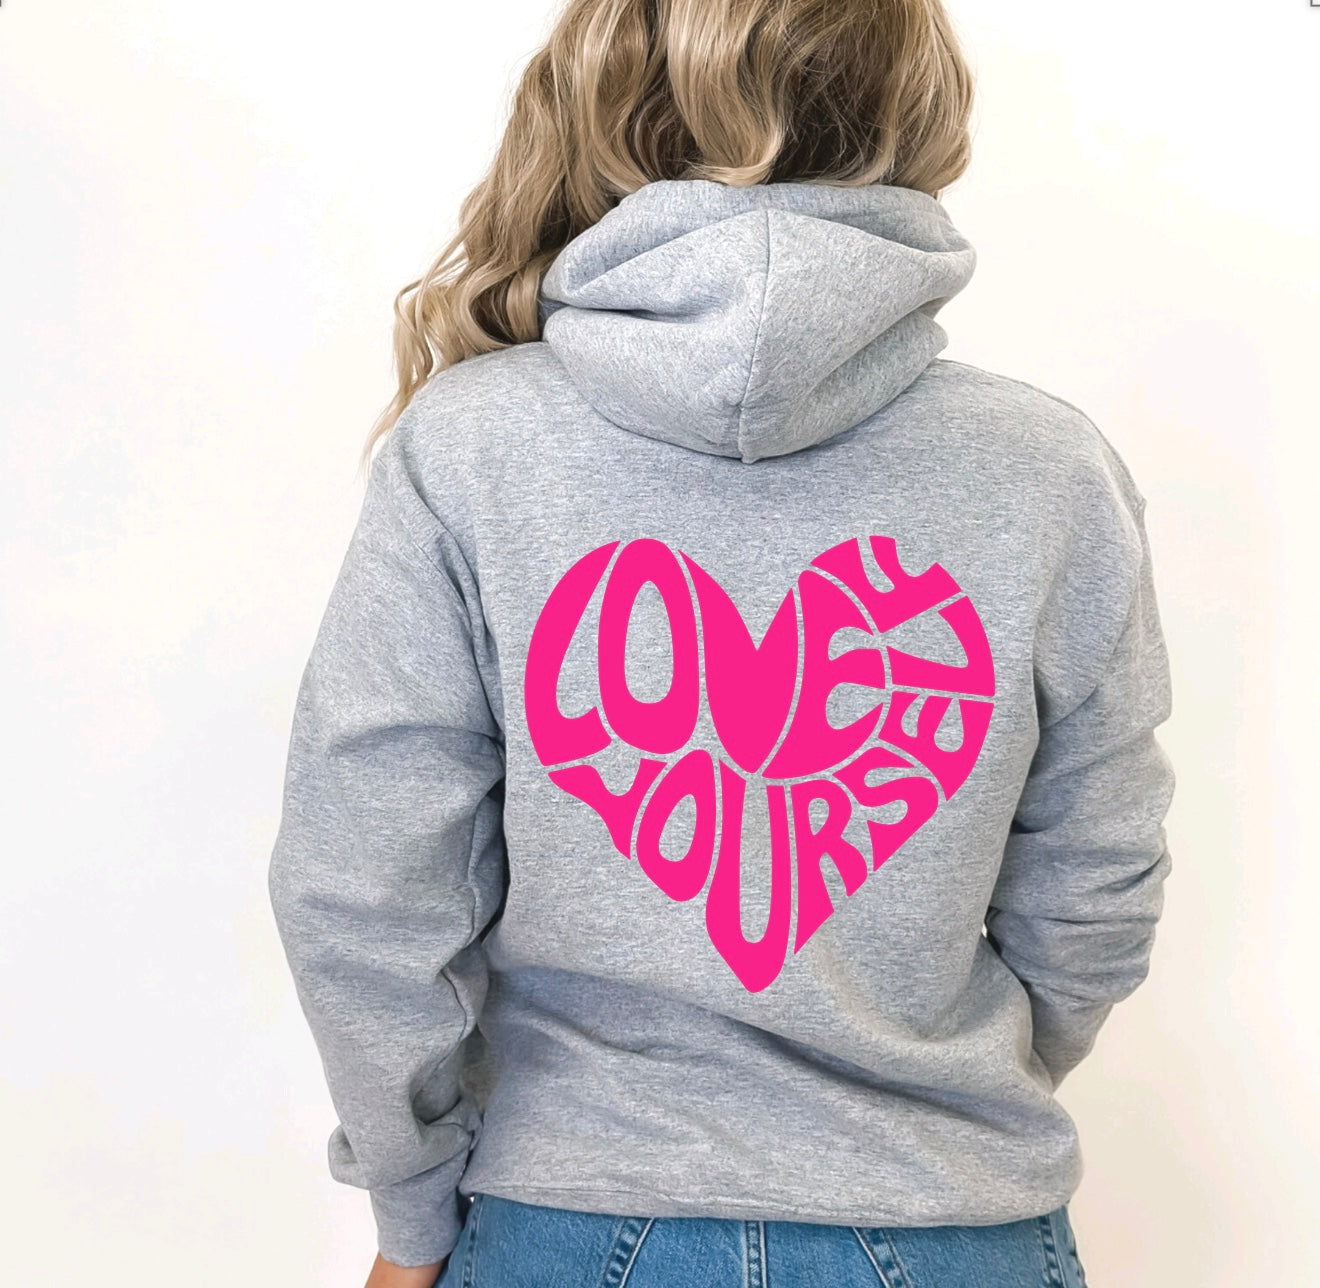 Love yourself unisex hoodie with sleeve design in grey with pink graphic 